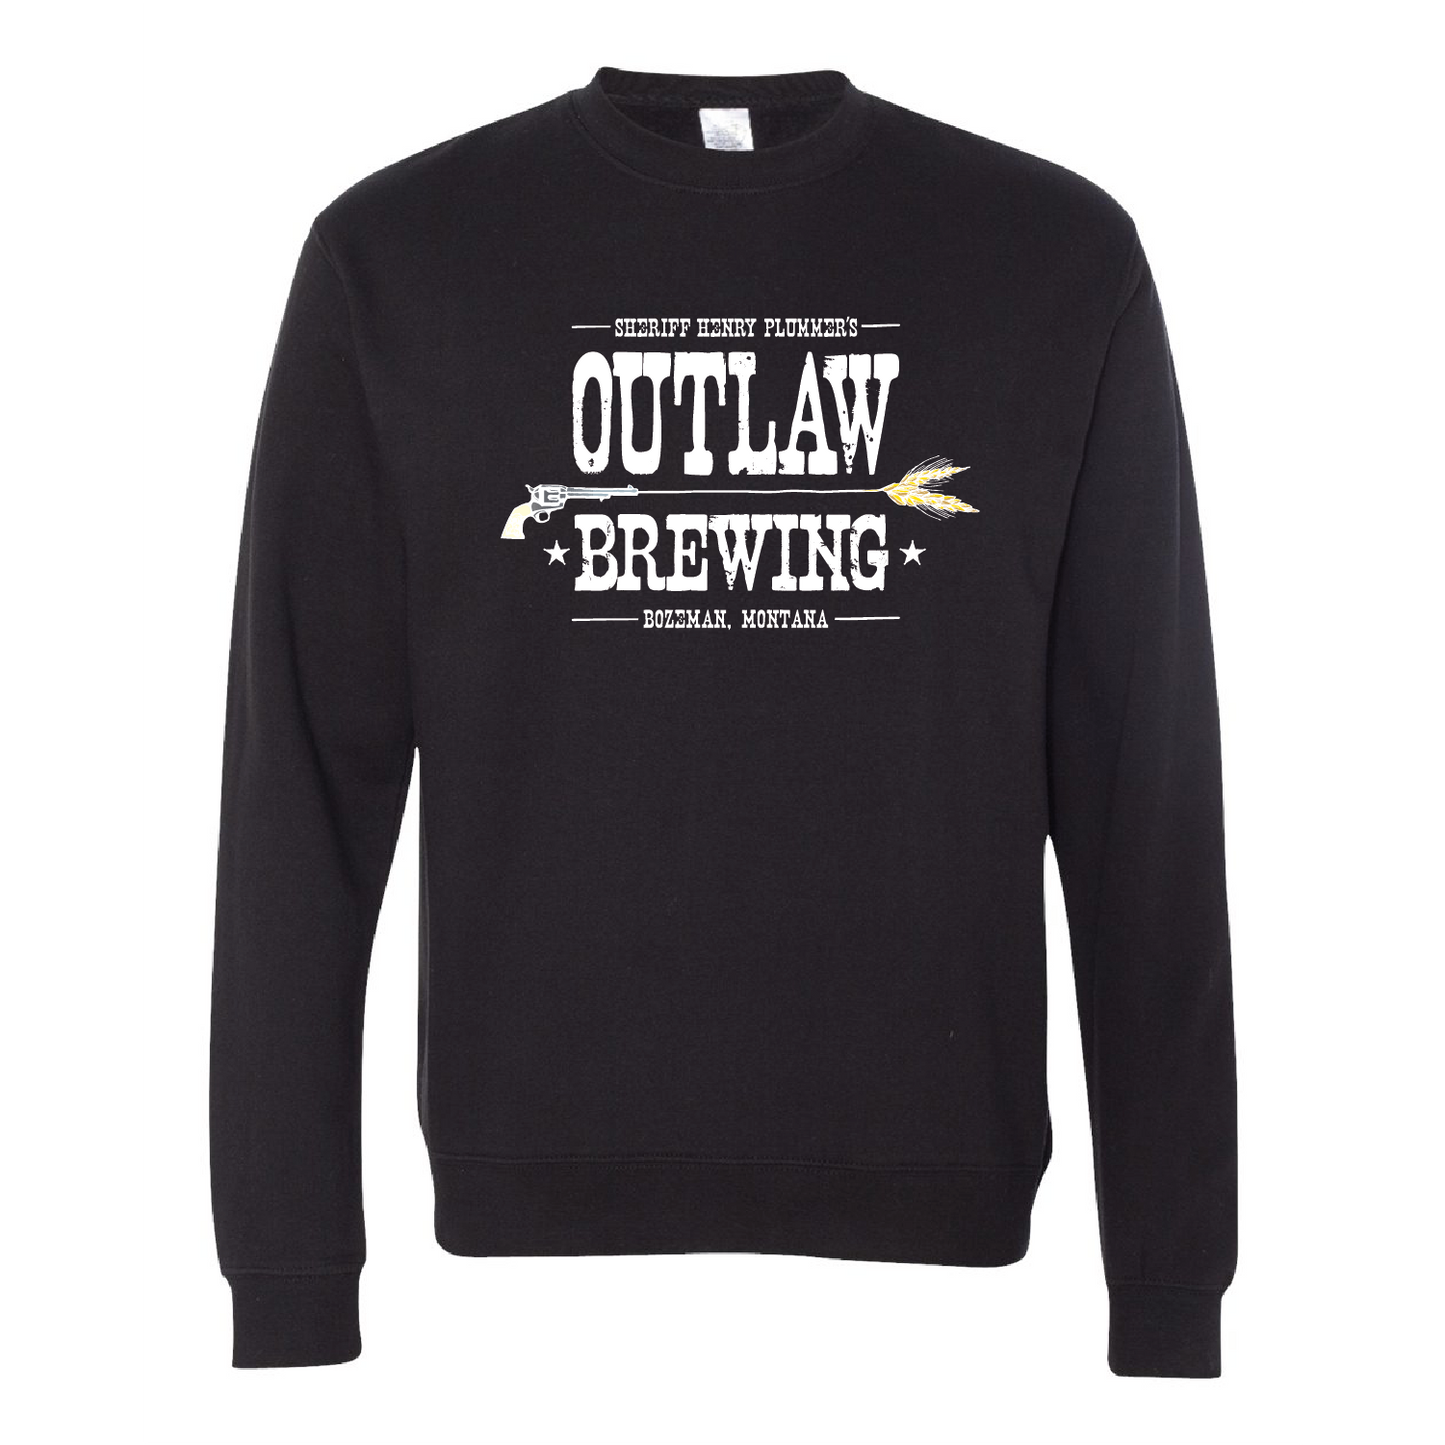 Outlaw Brewing Unisex Midweight Sweatshirt